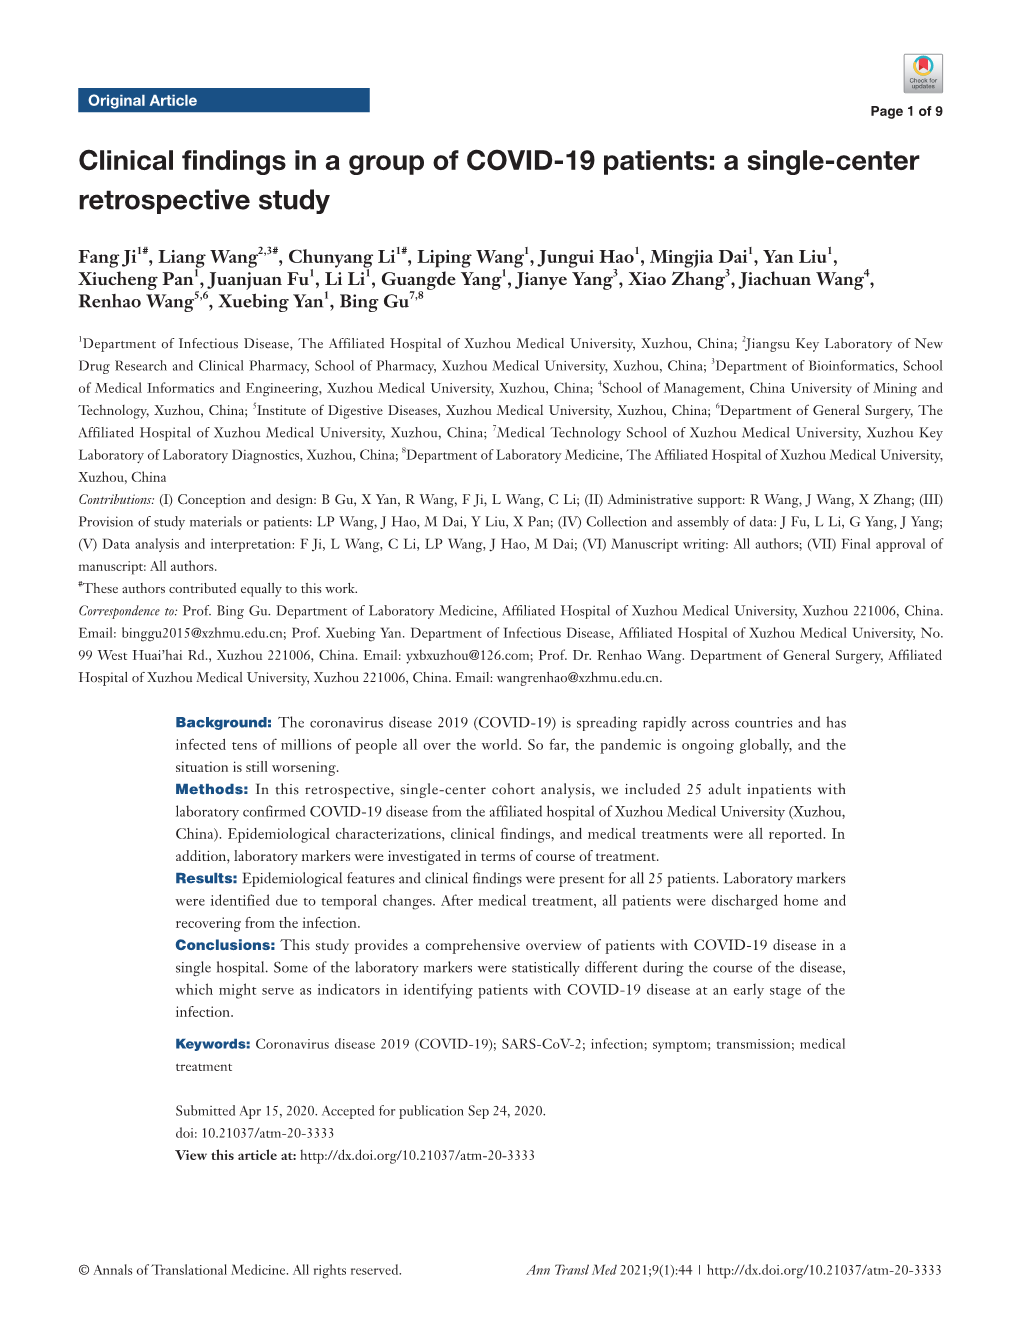 Clinical Findings in a Group of COVID-19 Patients: a Single-Center Retrospective Study